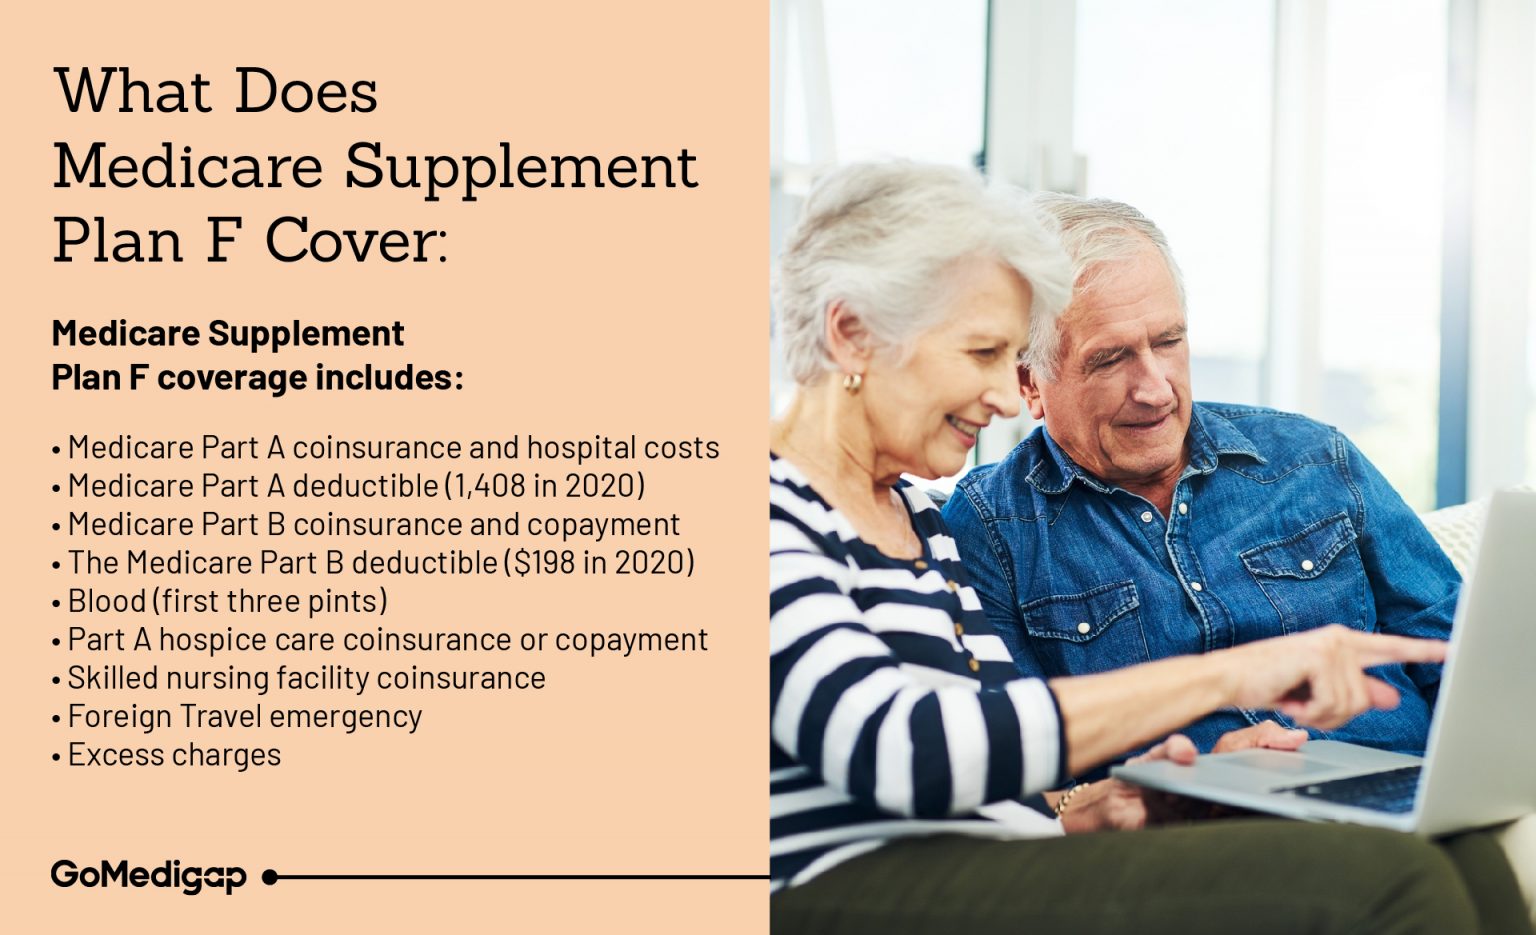 What Is Medicare Supplement Plan F?